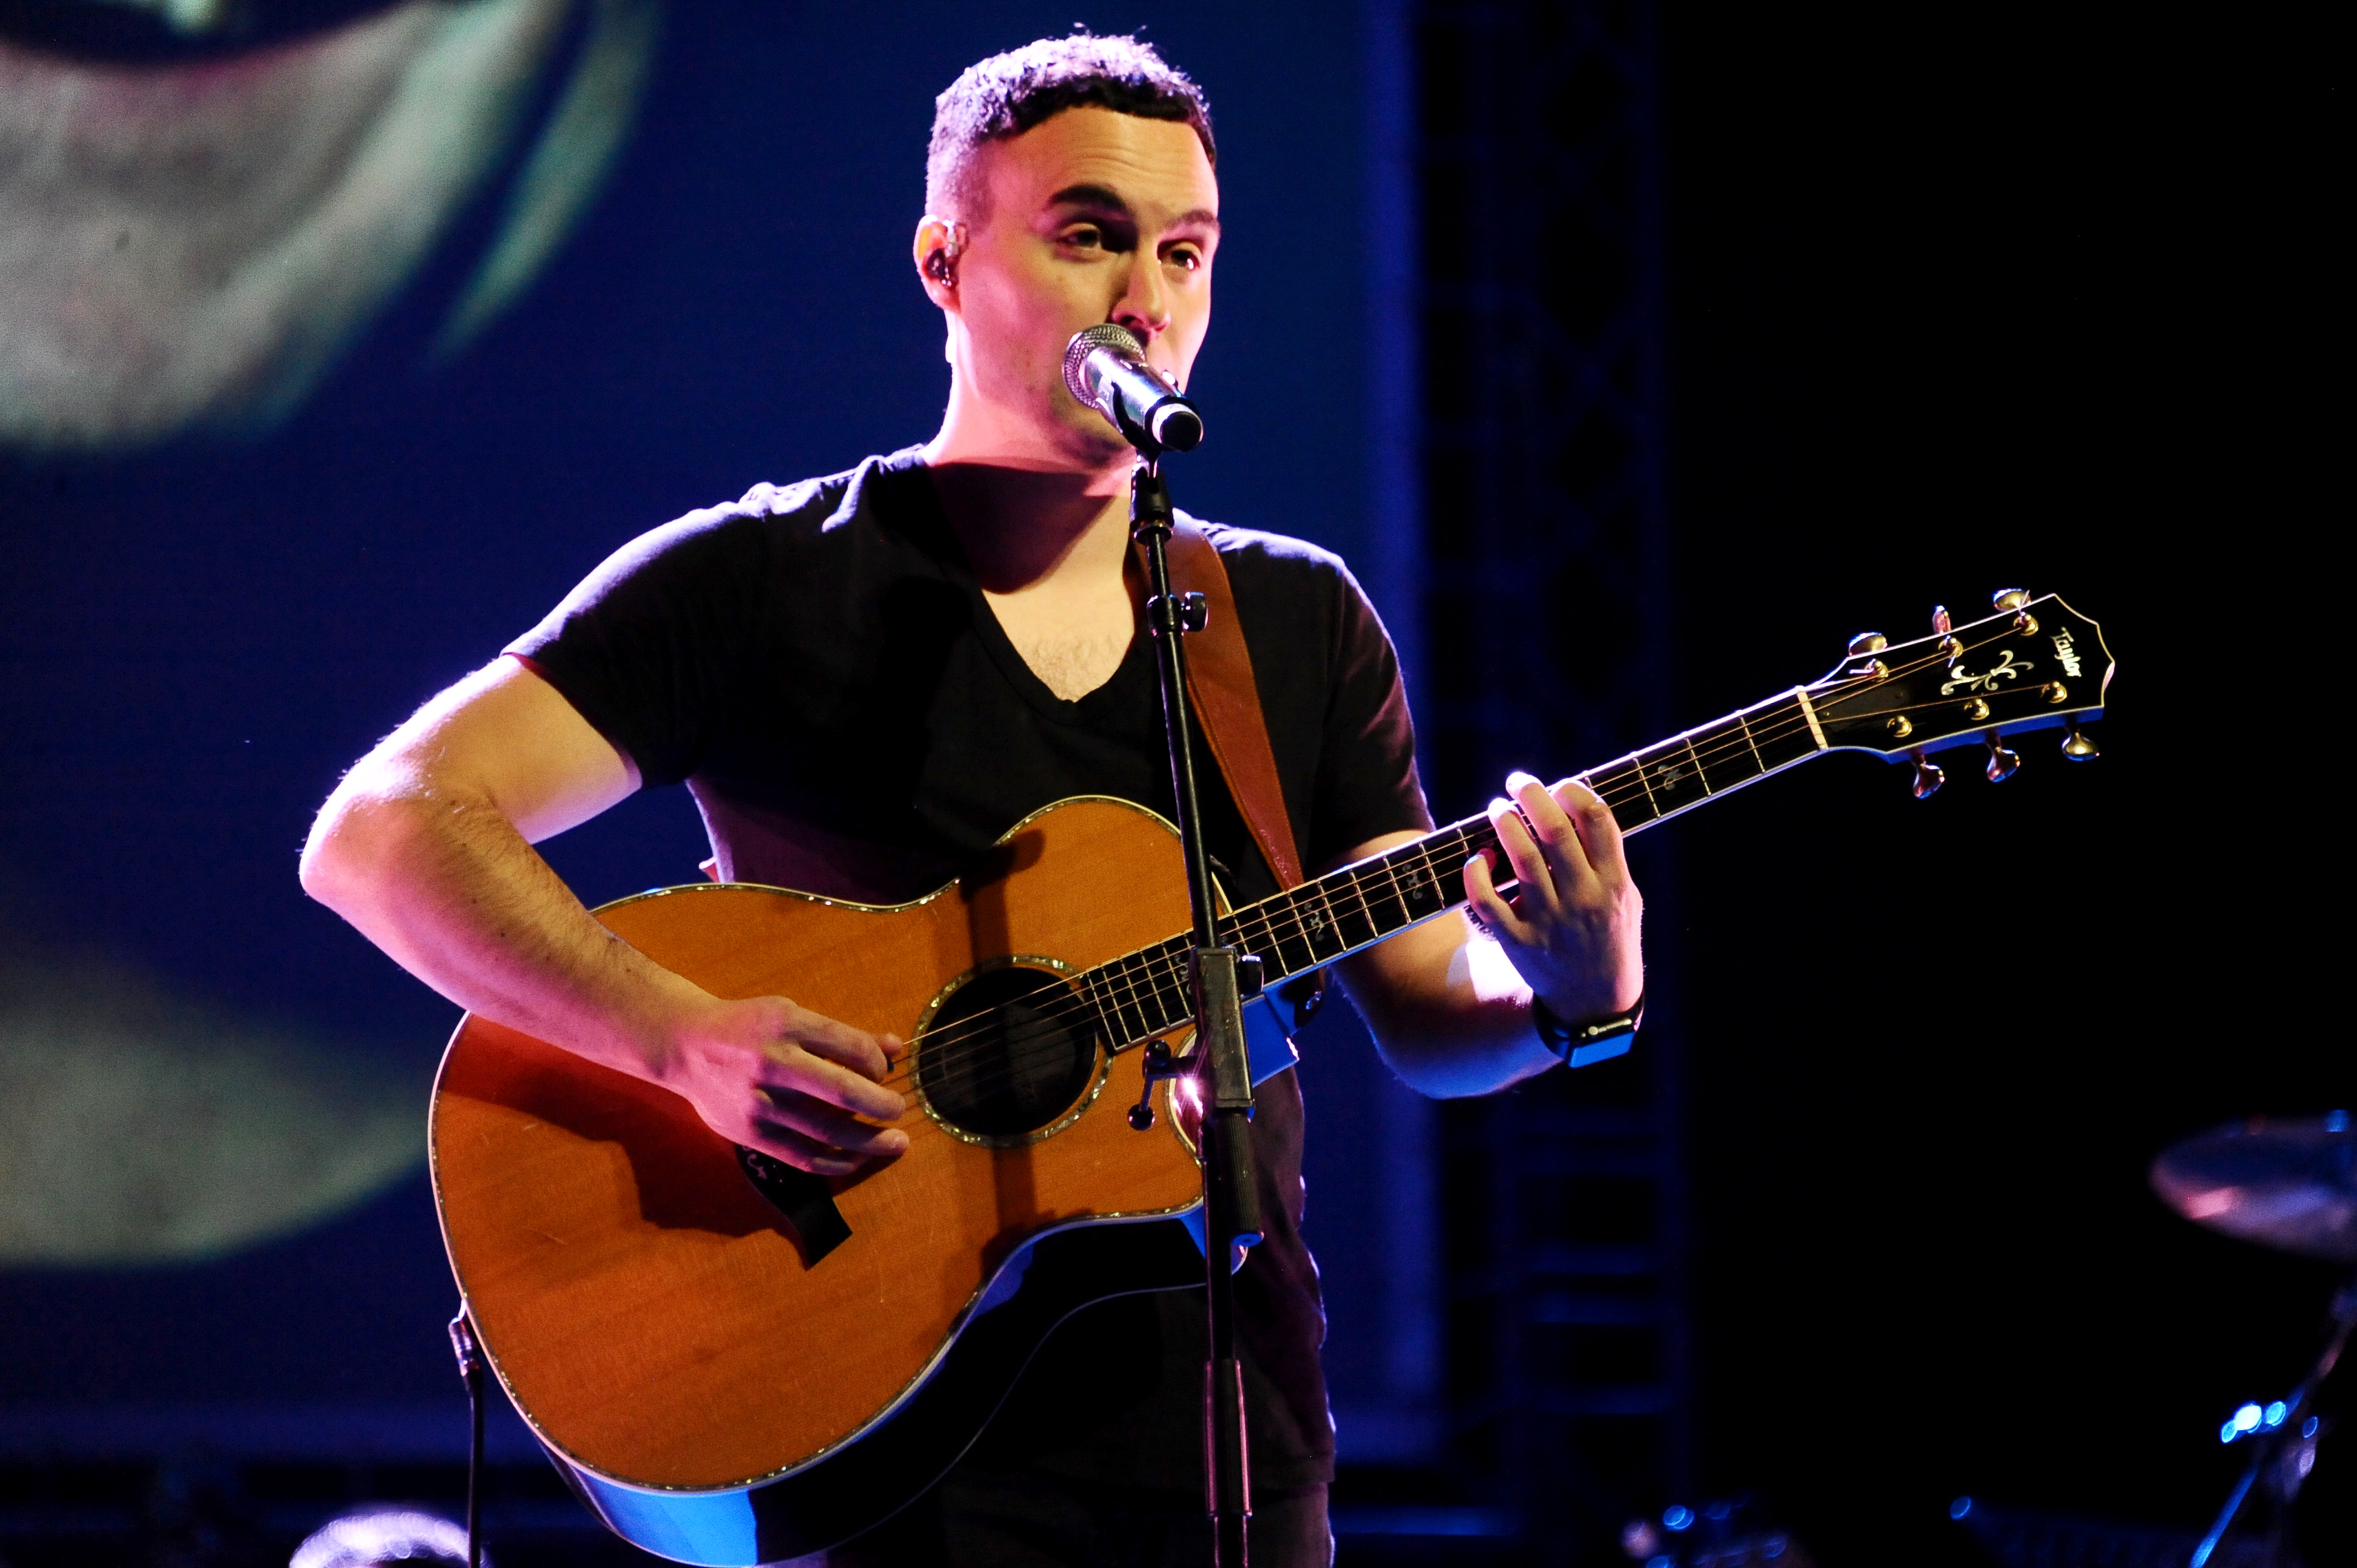 SANDTON, SOUTH AFRICA - JULY 26: Jesse Clegg during the memorial service of the late South African music legend Jonny Clegg at the Sandton Convention Centre on July 26, 2019 in Sandton, South Africa. Clegg, a renowned musician and anthropologist, passed away on July 16 after a long battle with cancer. (Photo by Gallo Images/Oupa Bopape)